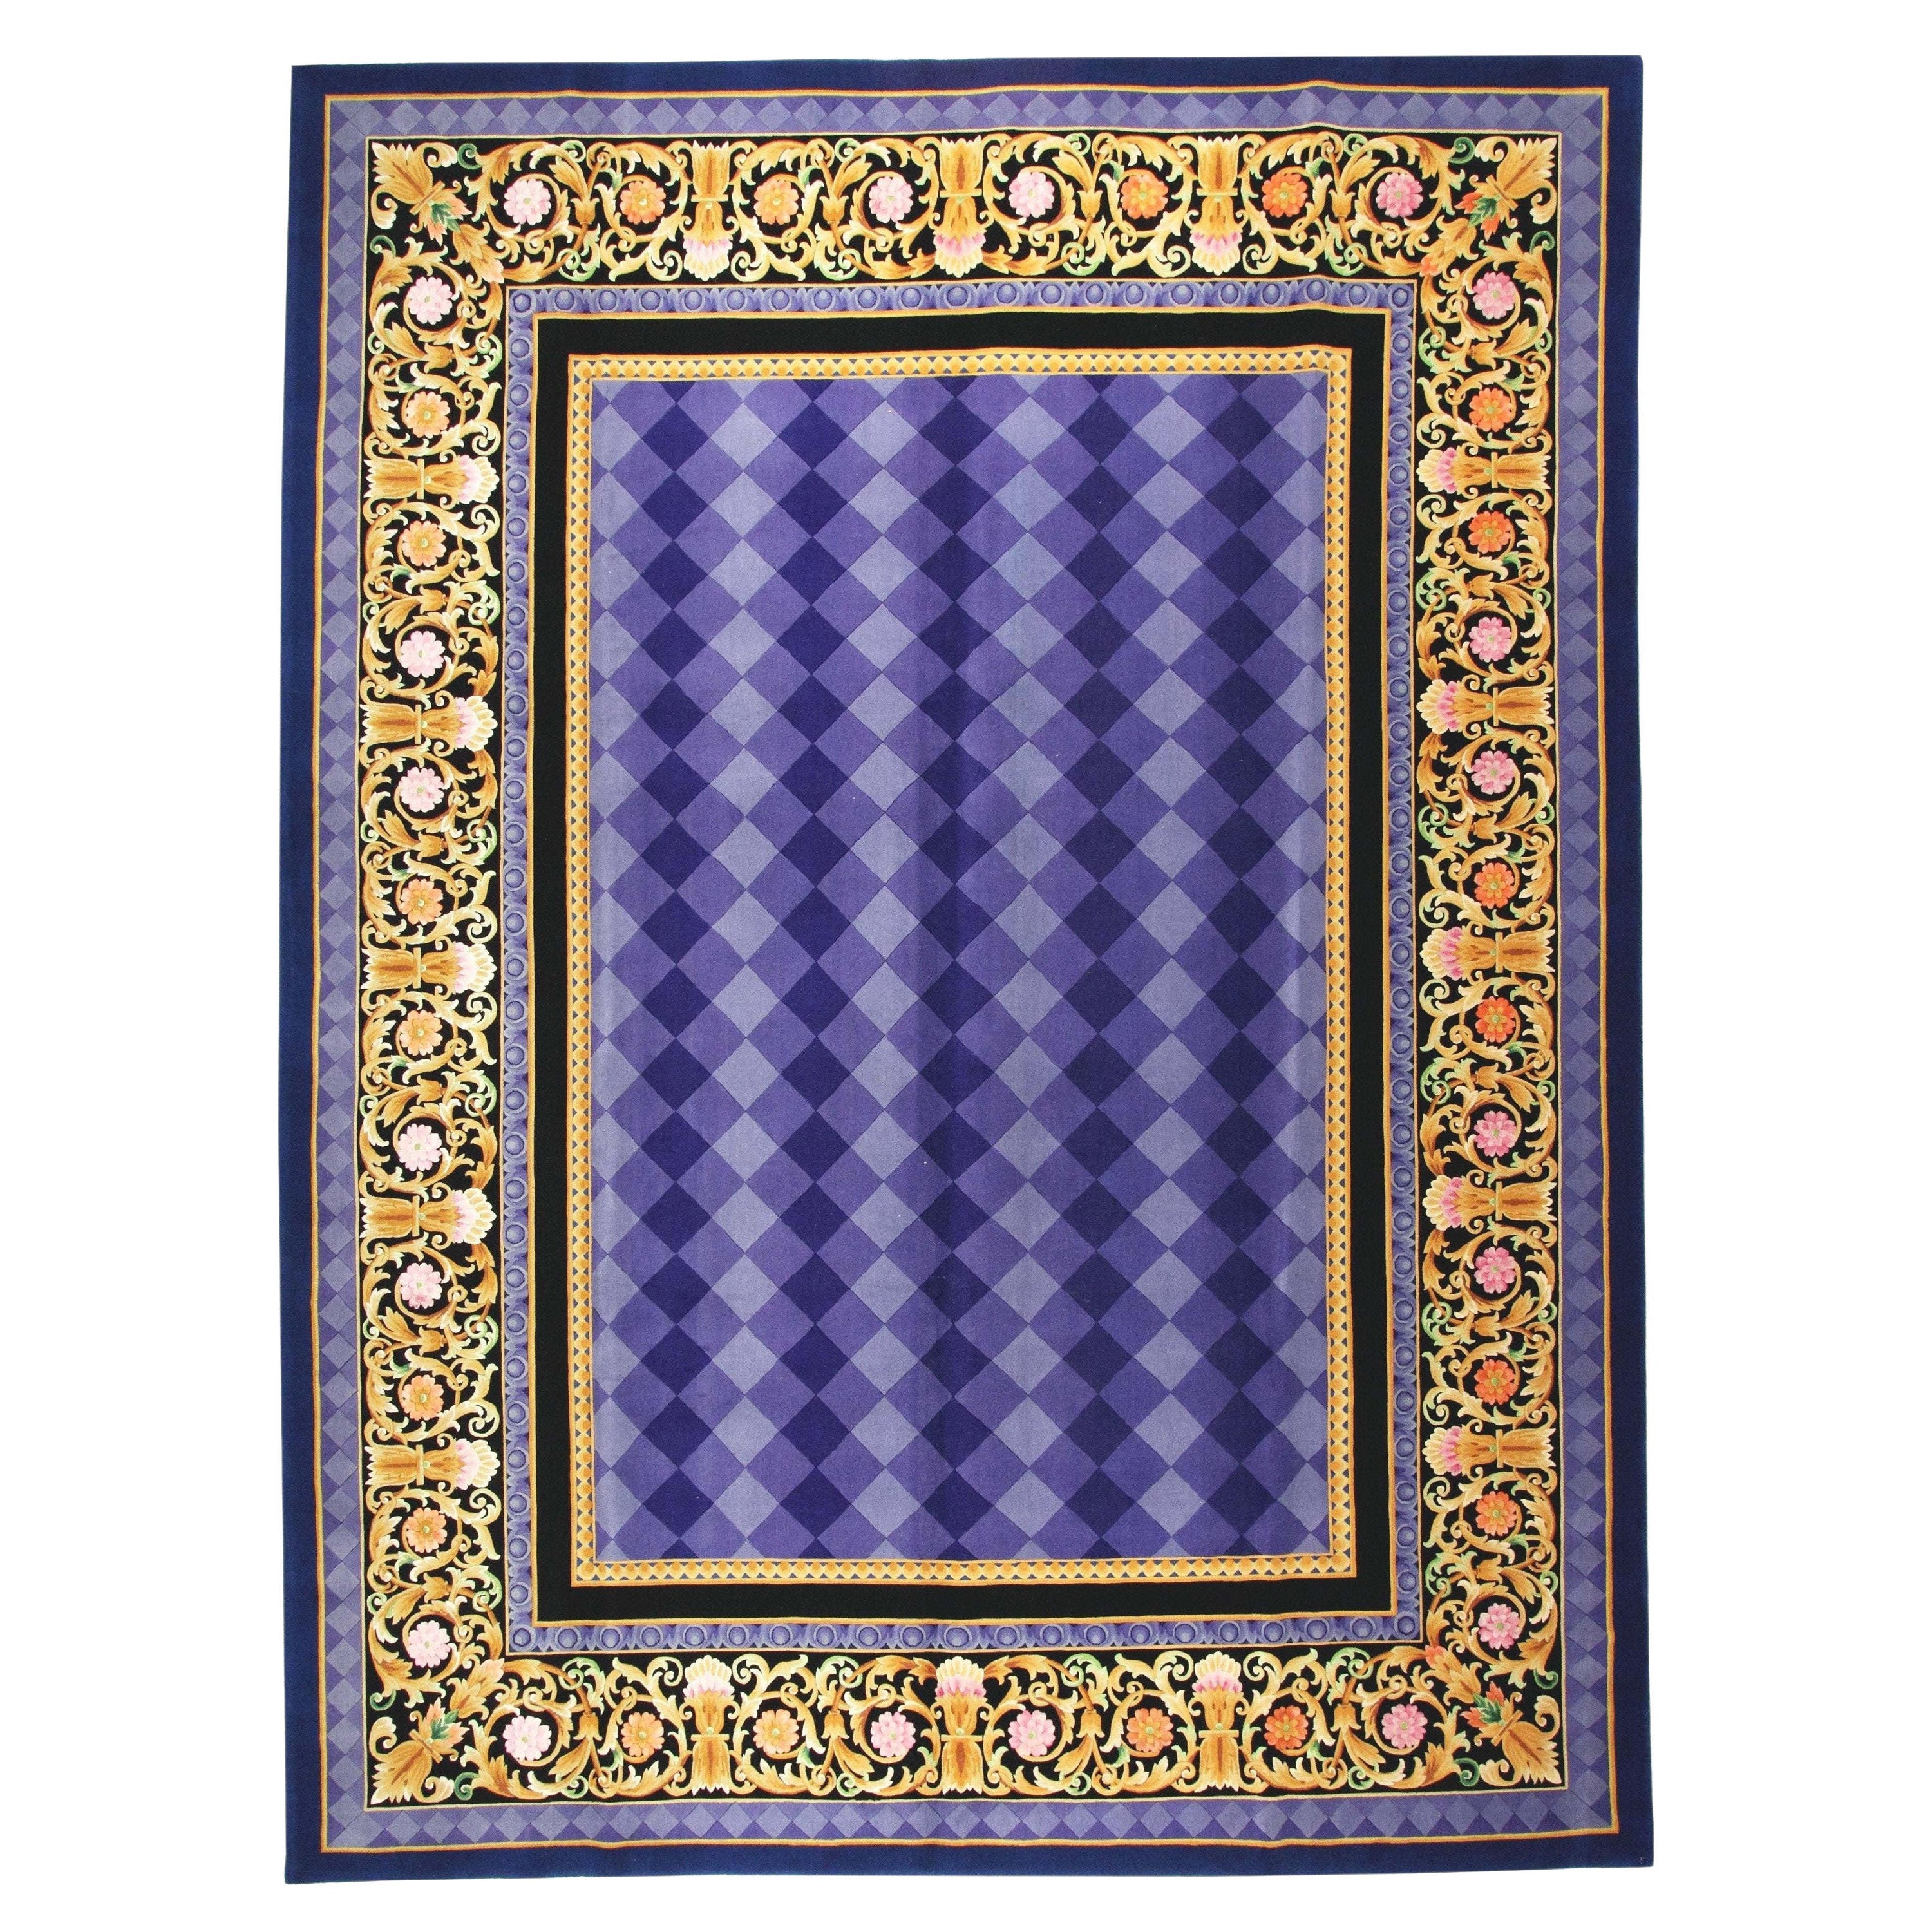 VIA COMO 'Trianon Blue' Hand Knotted Wool & Silk Rug Carpet 10x13  One of a Kind